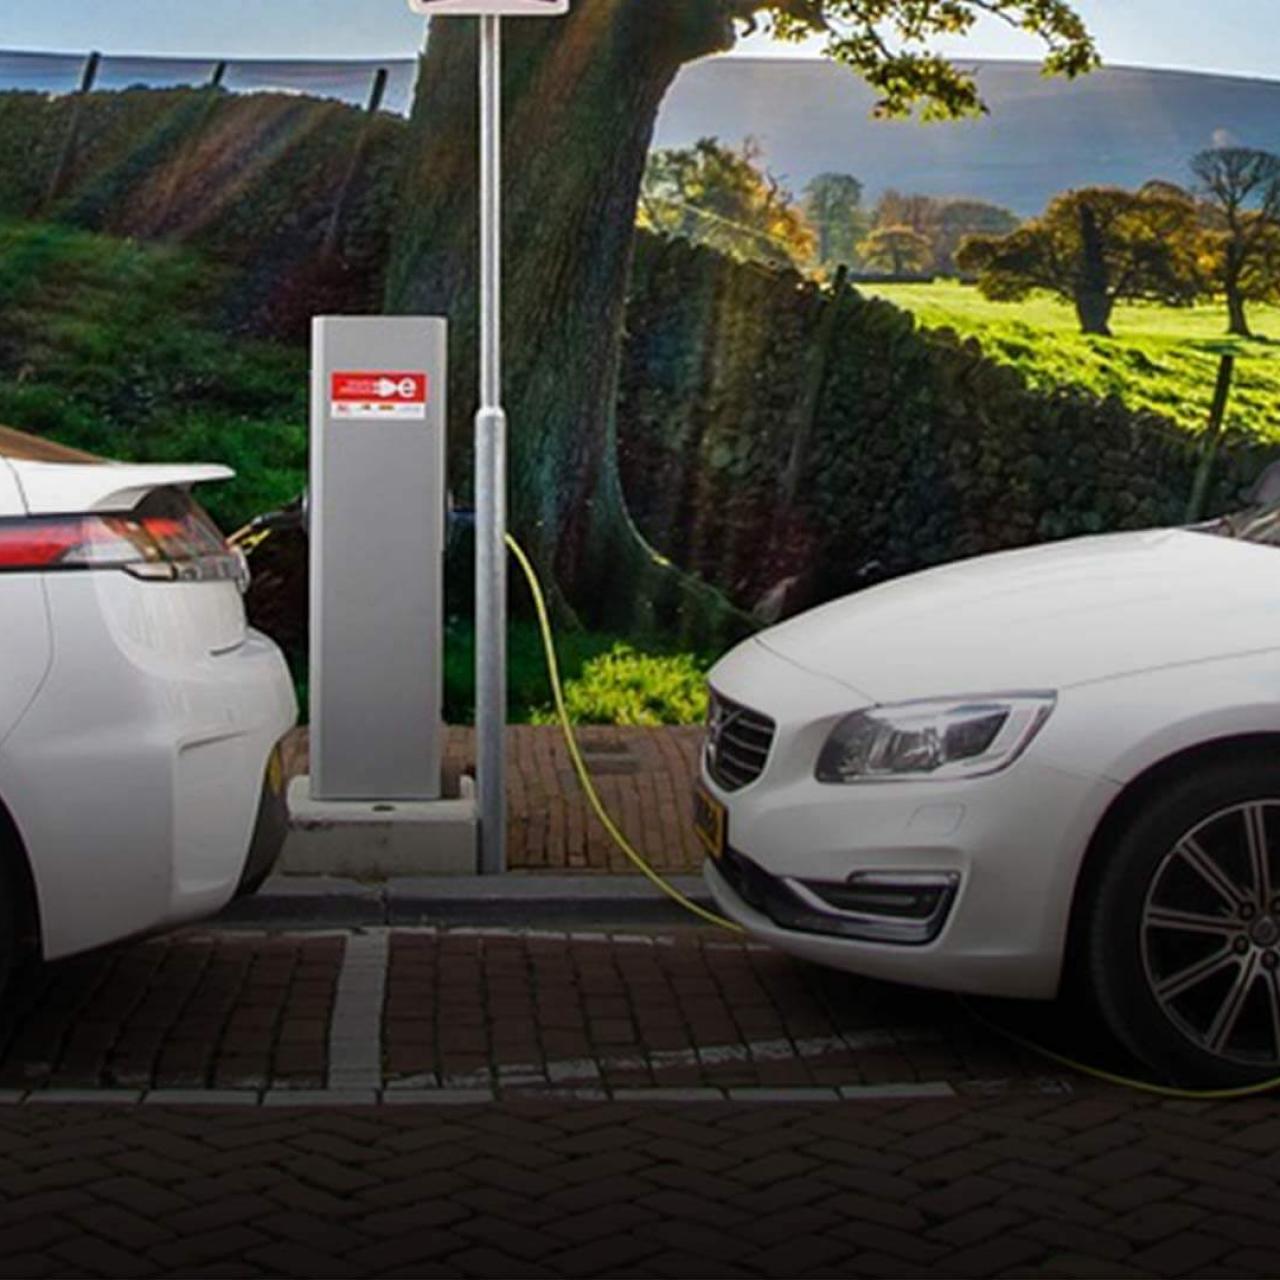 Tips for safely charging an EV at home